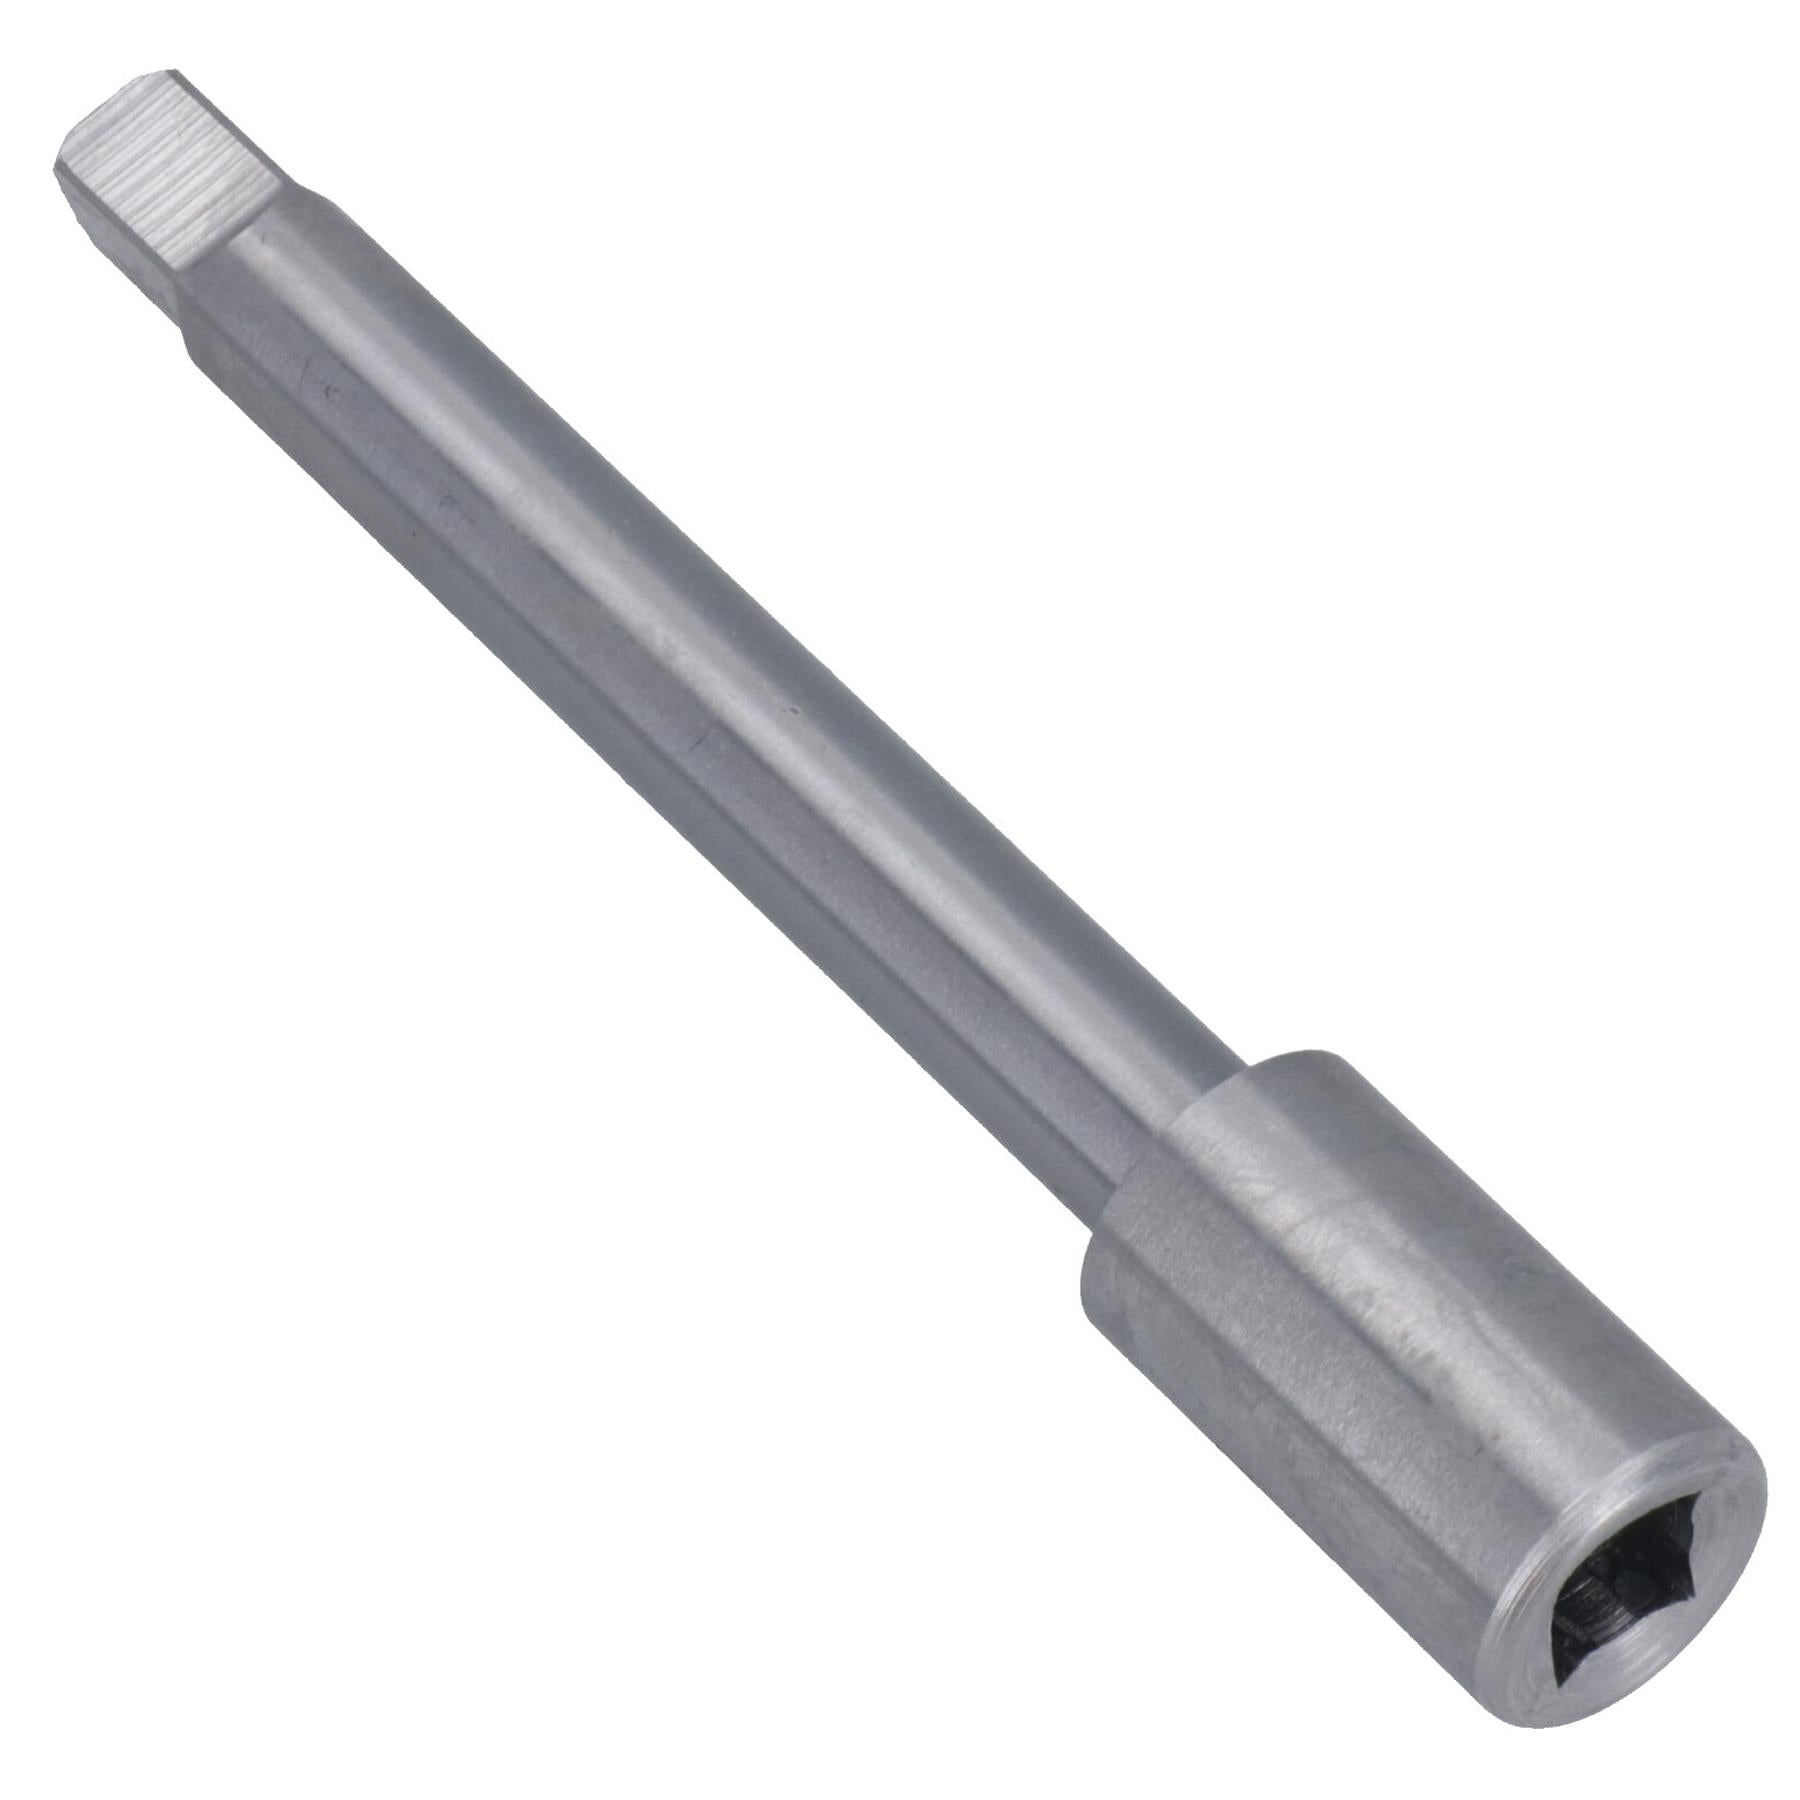 Rethreading Tap Extension Sleeve For Taps with 9.0mm Square DIN 377